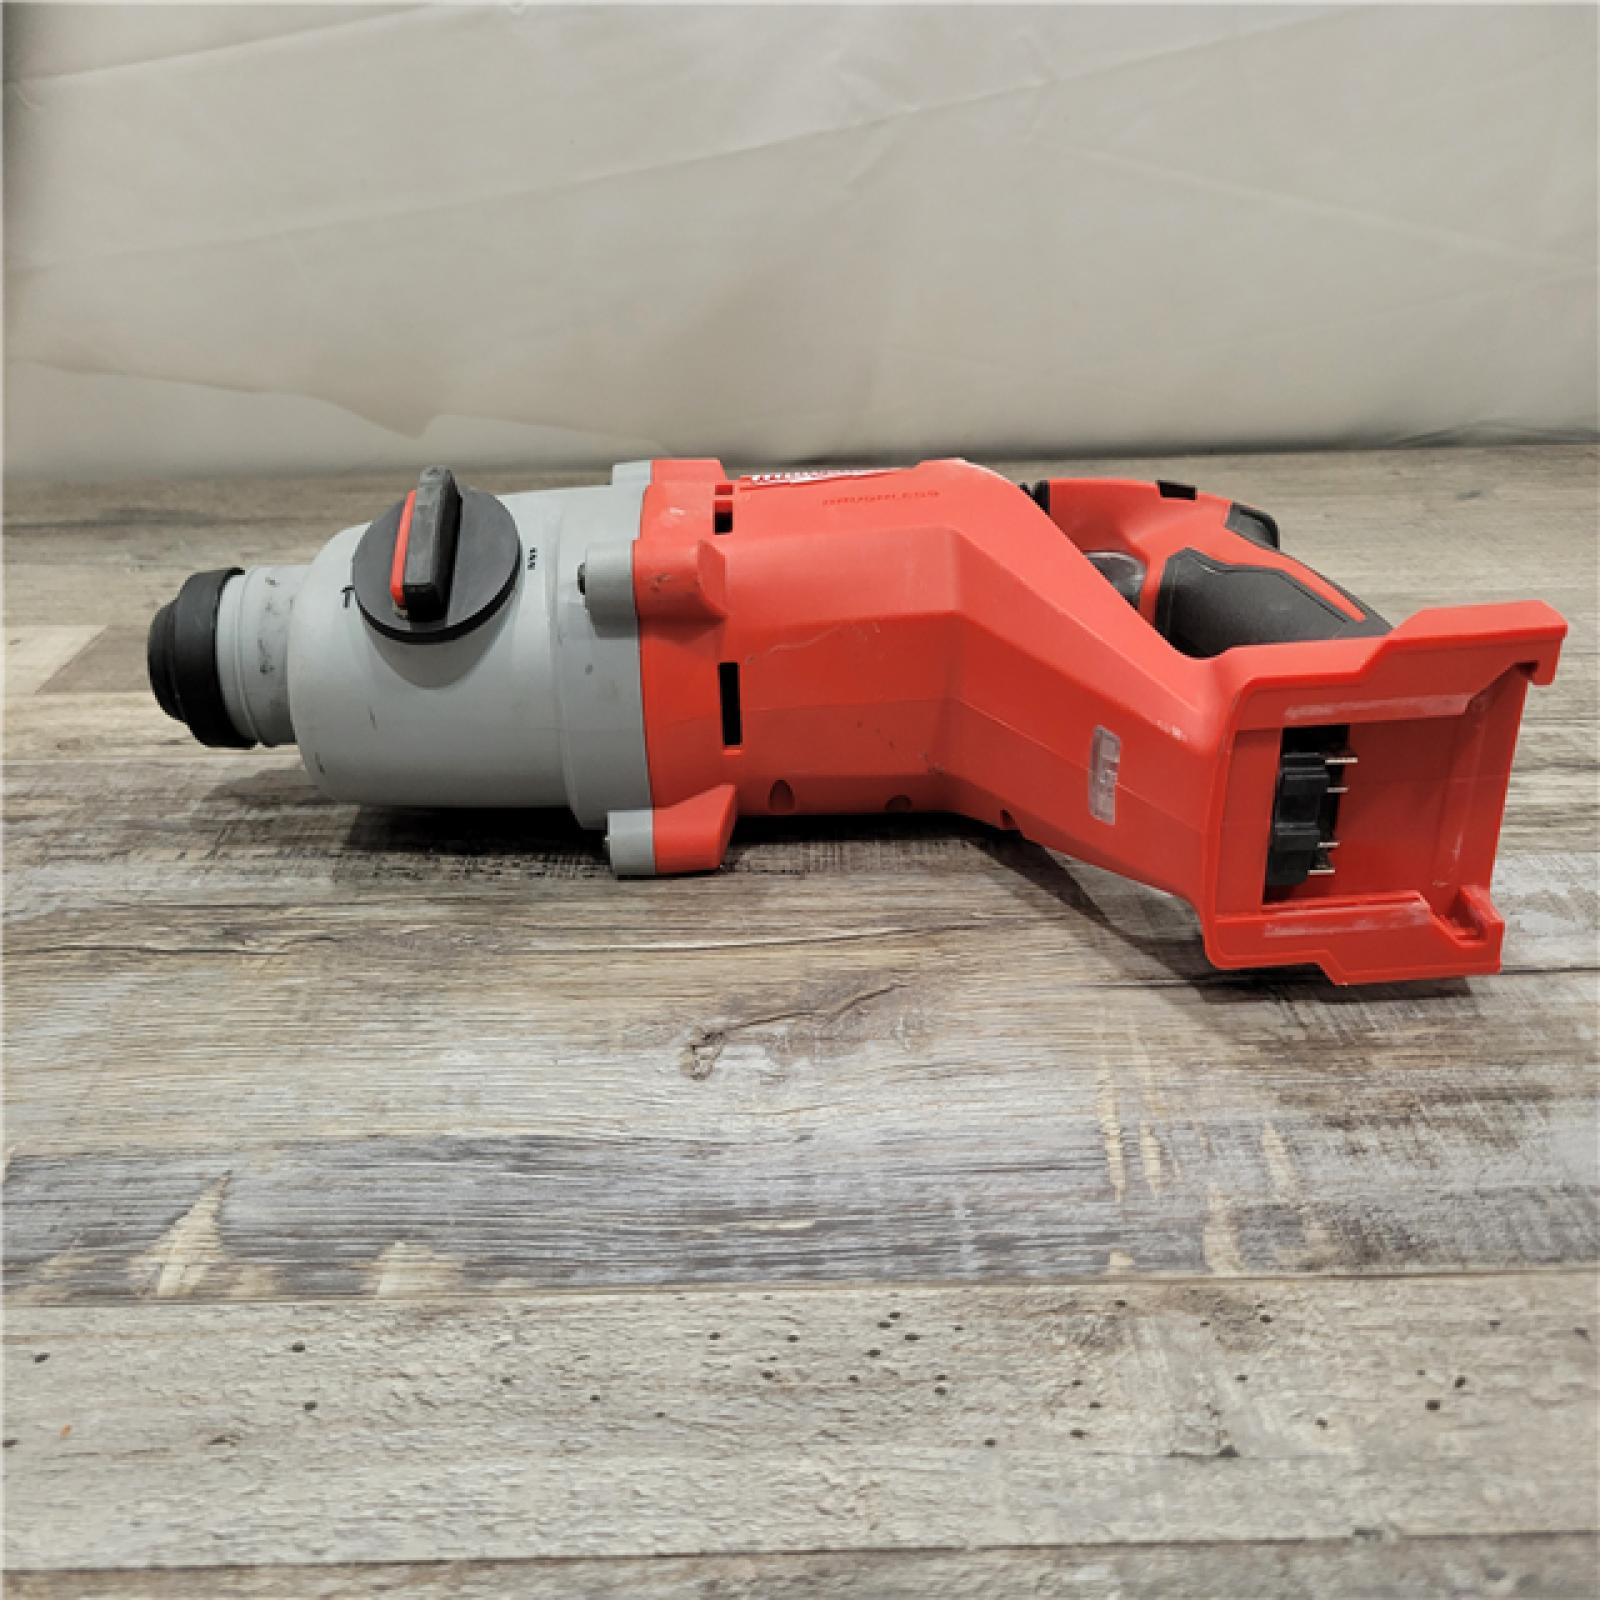 AS-IS Milwaukee 18V M18 Lithium-Ion Cordless SDS Plus D-Handle Rotary Hammer (Tool Only)